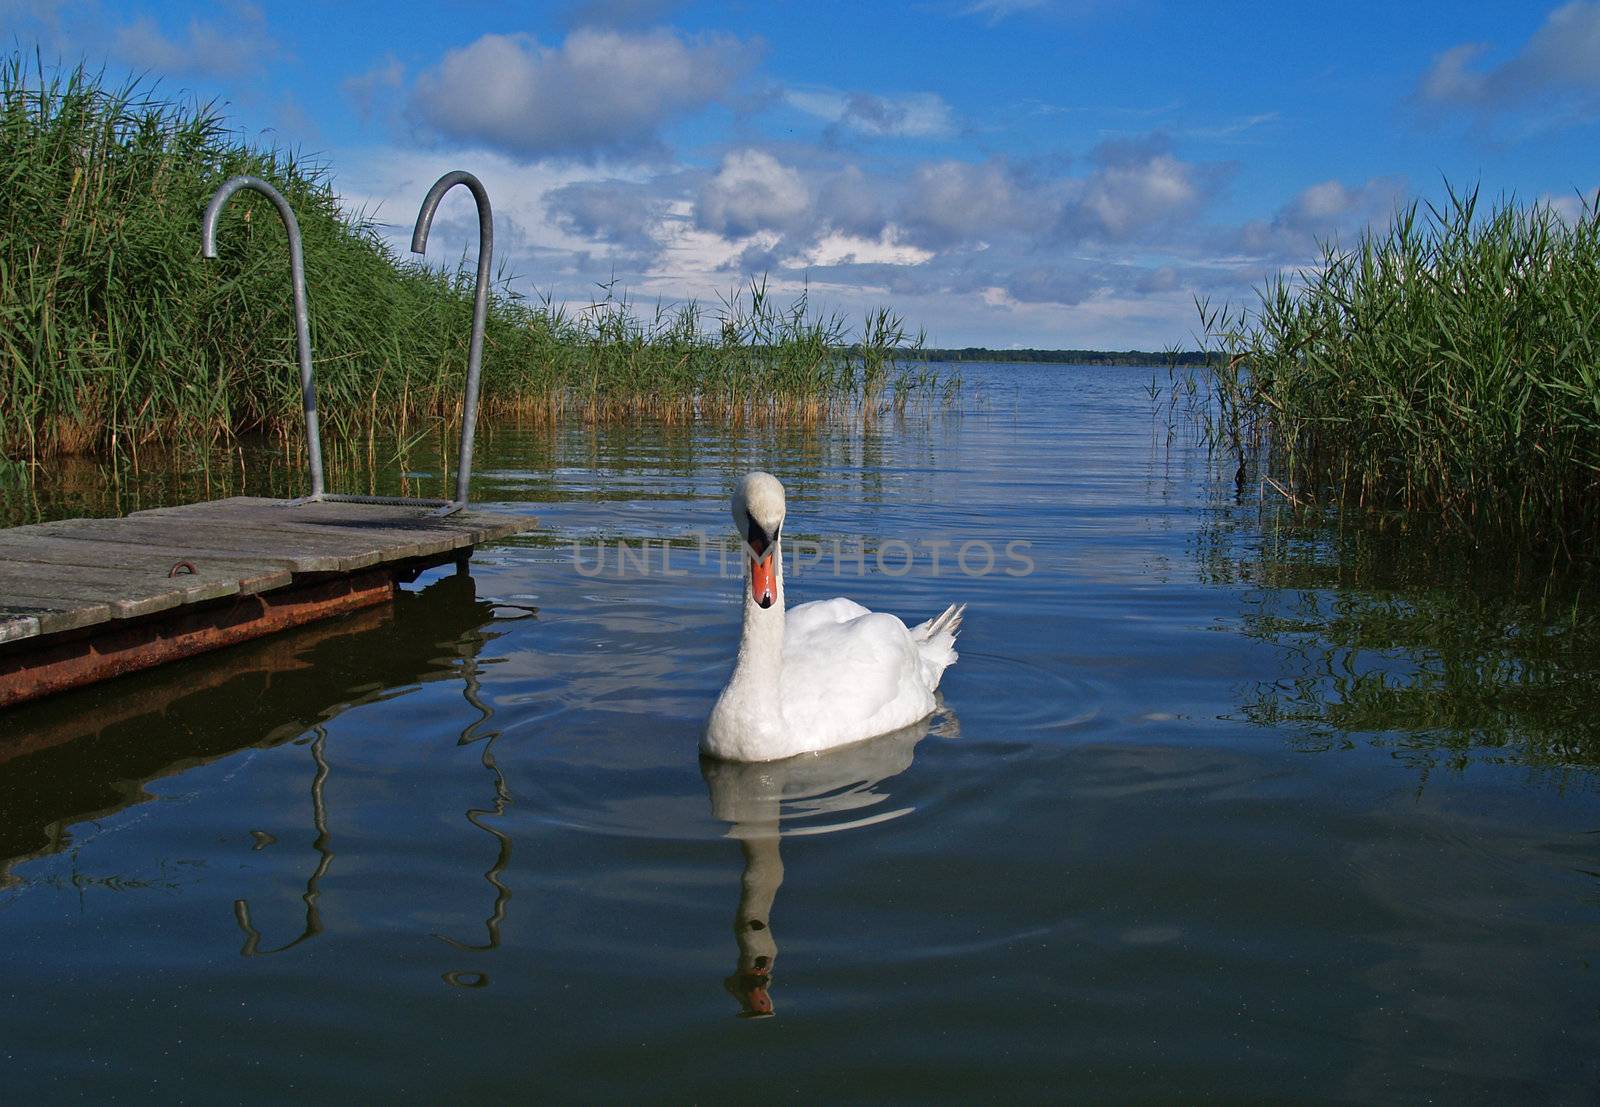 A mute swan on a lake on the island Usedom, Germany
